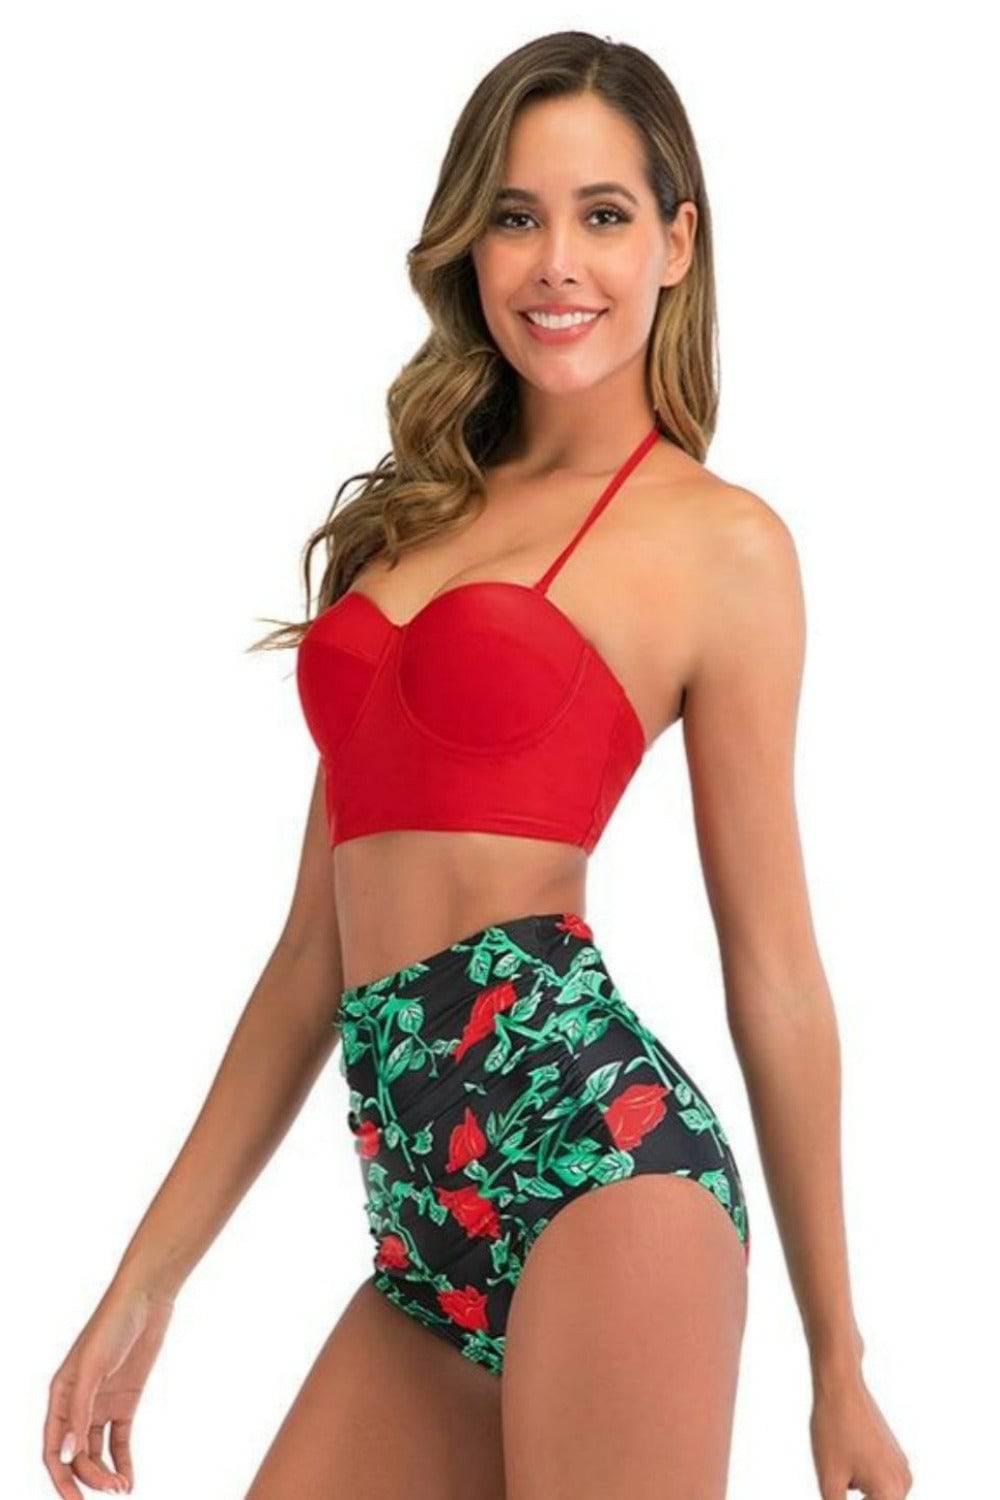 Red Floral Bikini High Waisted Bustier Bra Two-Piece Swimsuit - TGC Boutique - Swimsuit